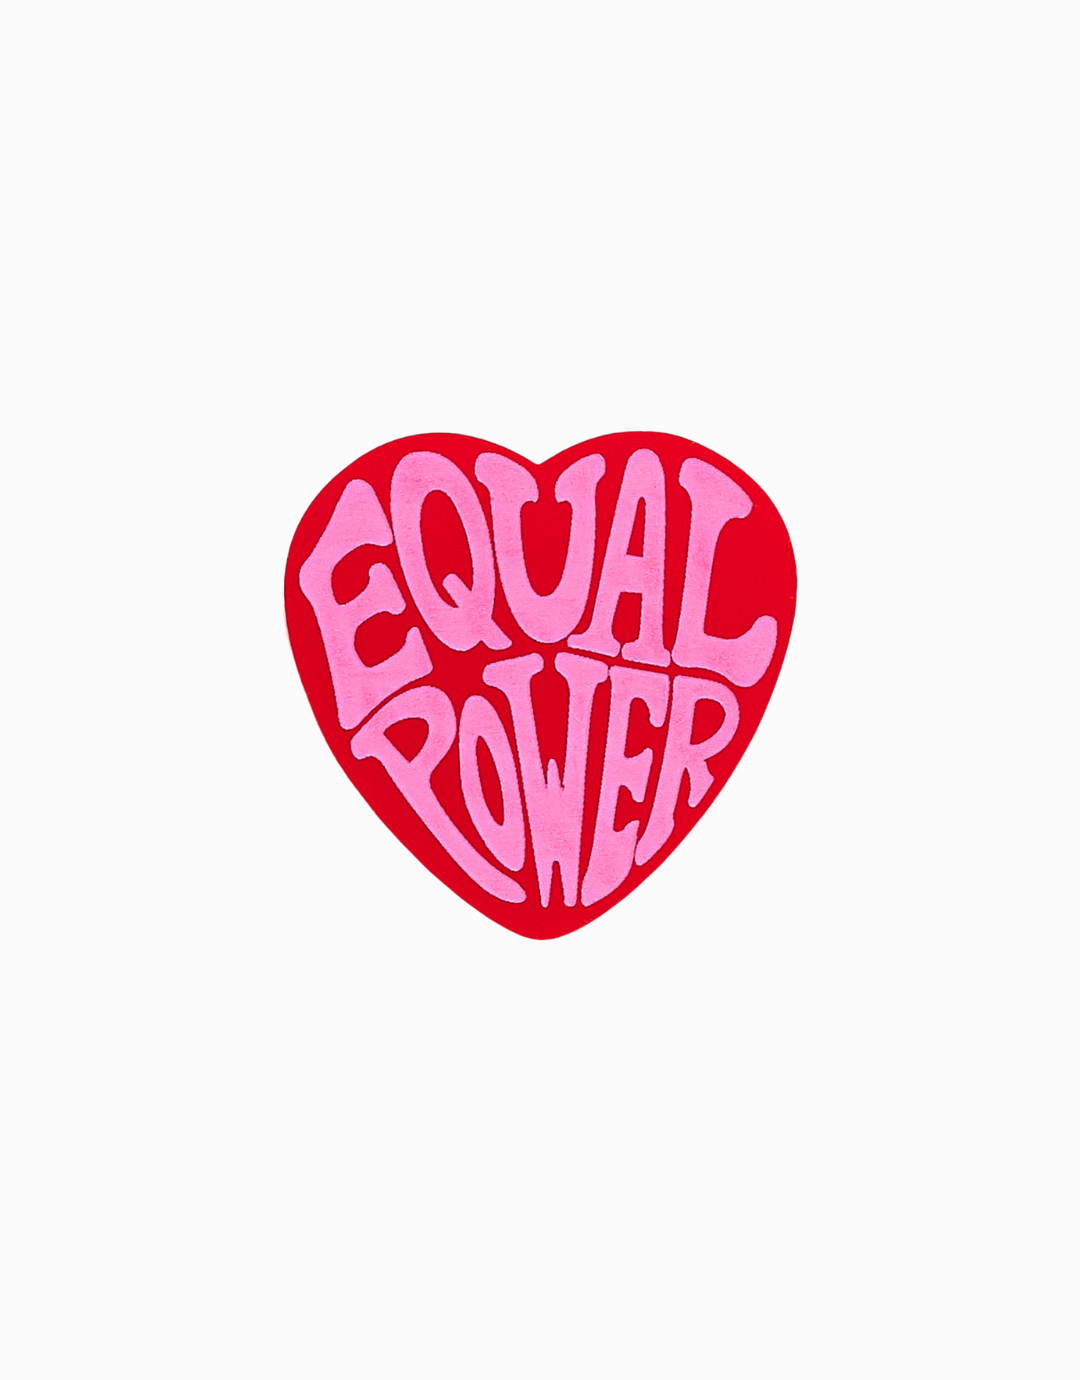 Equal Power Heart Ring